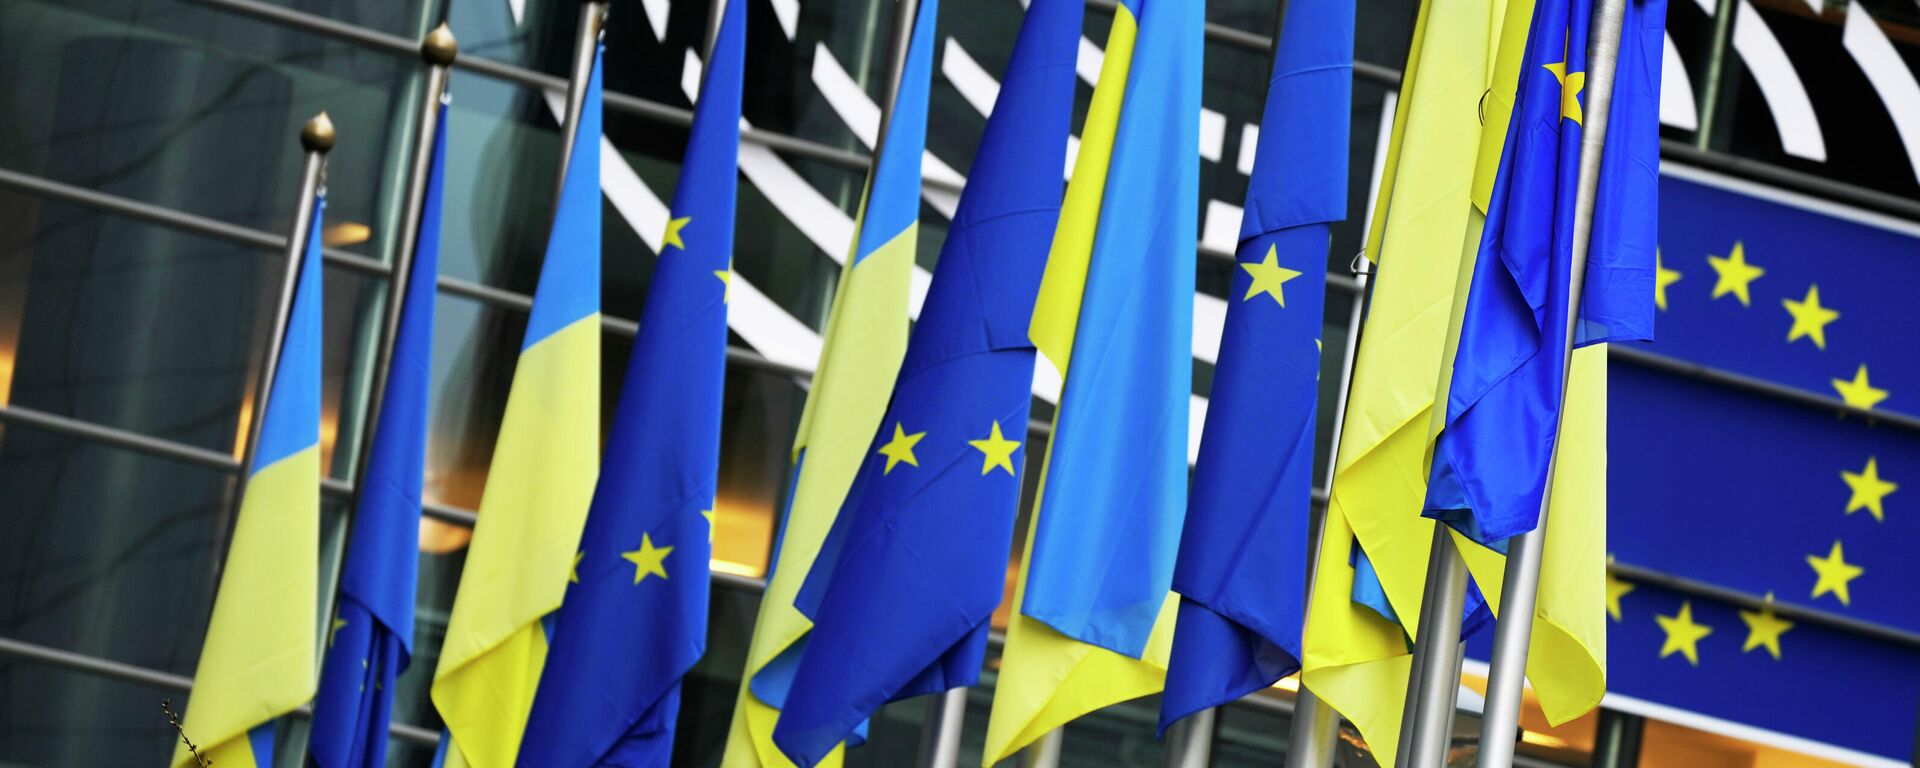 Ukraine and European Union flags hang together on the exterior of the building prior to an extraordinary plenary session on Ukraine at the European Parliament in Brussels, Tuesday, March 1, 2022 - Sputnik International, 1920, 19.07.2022